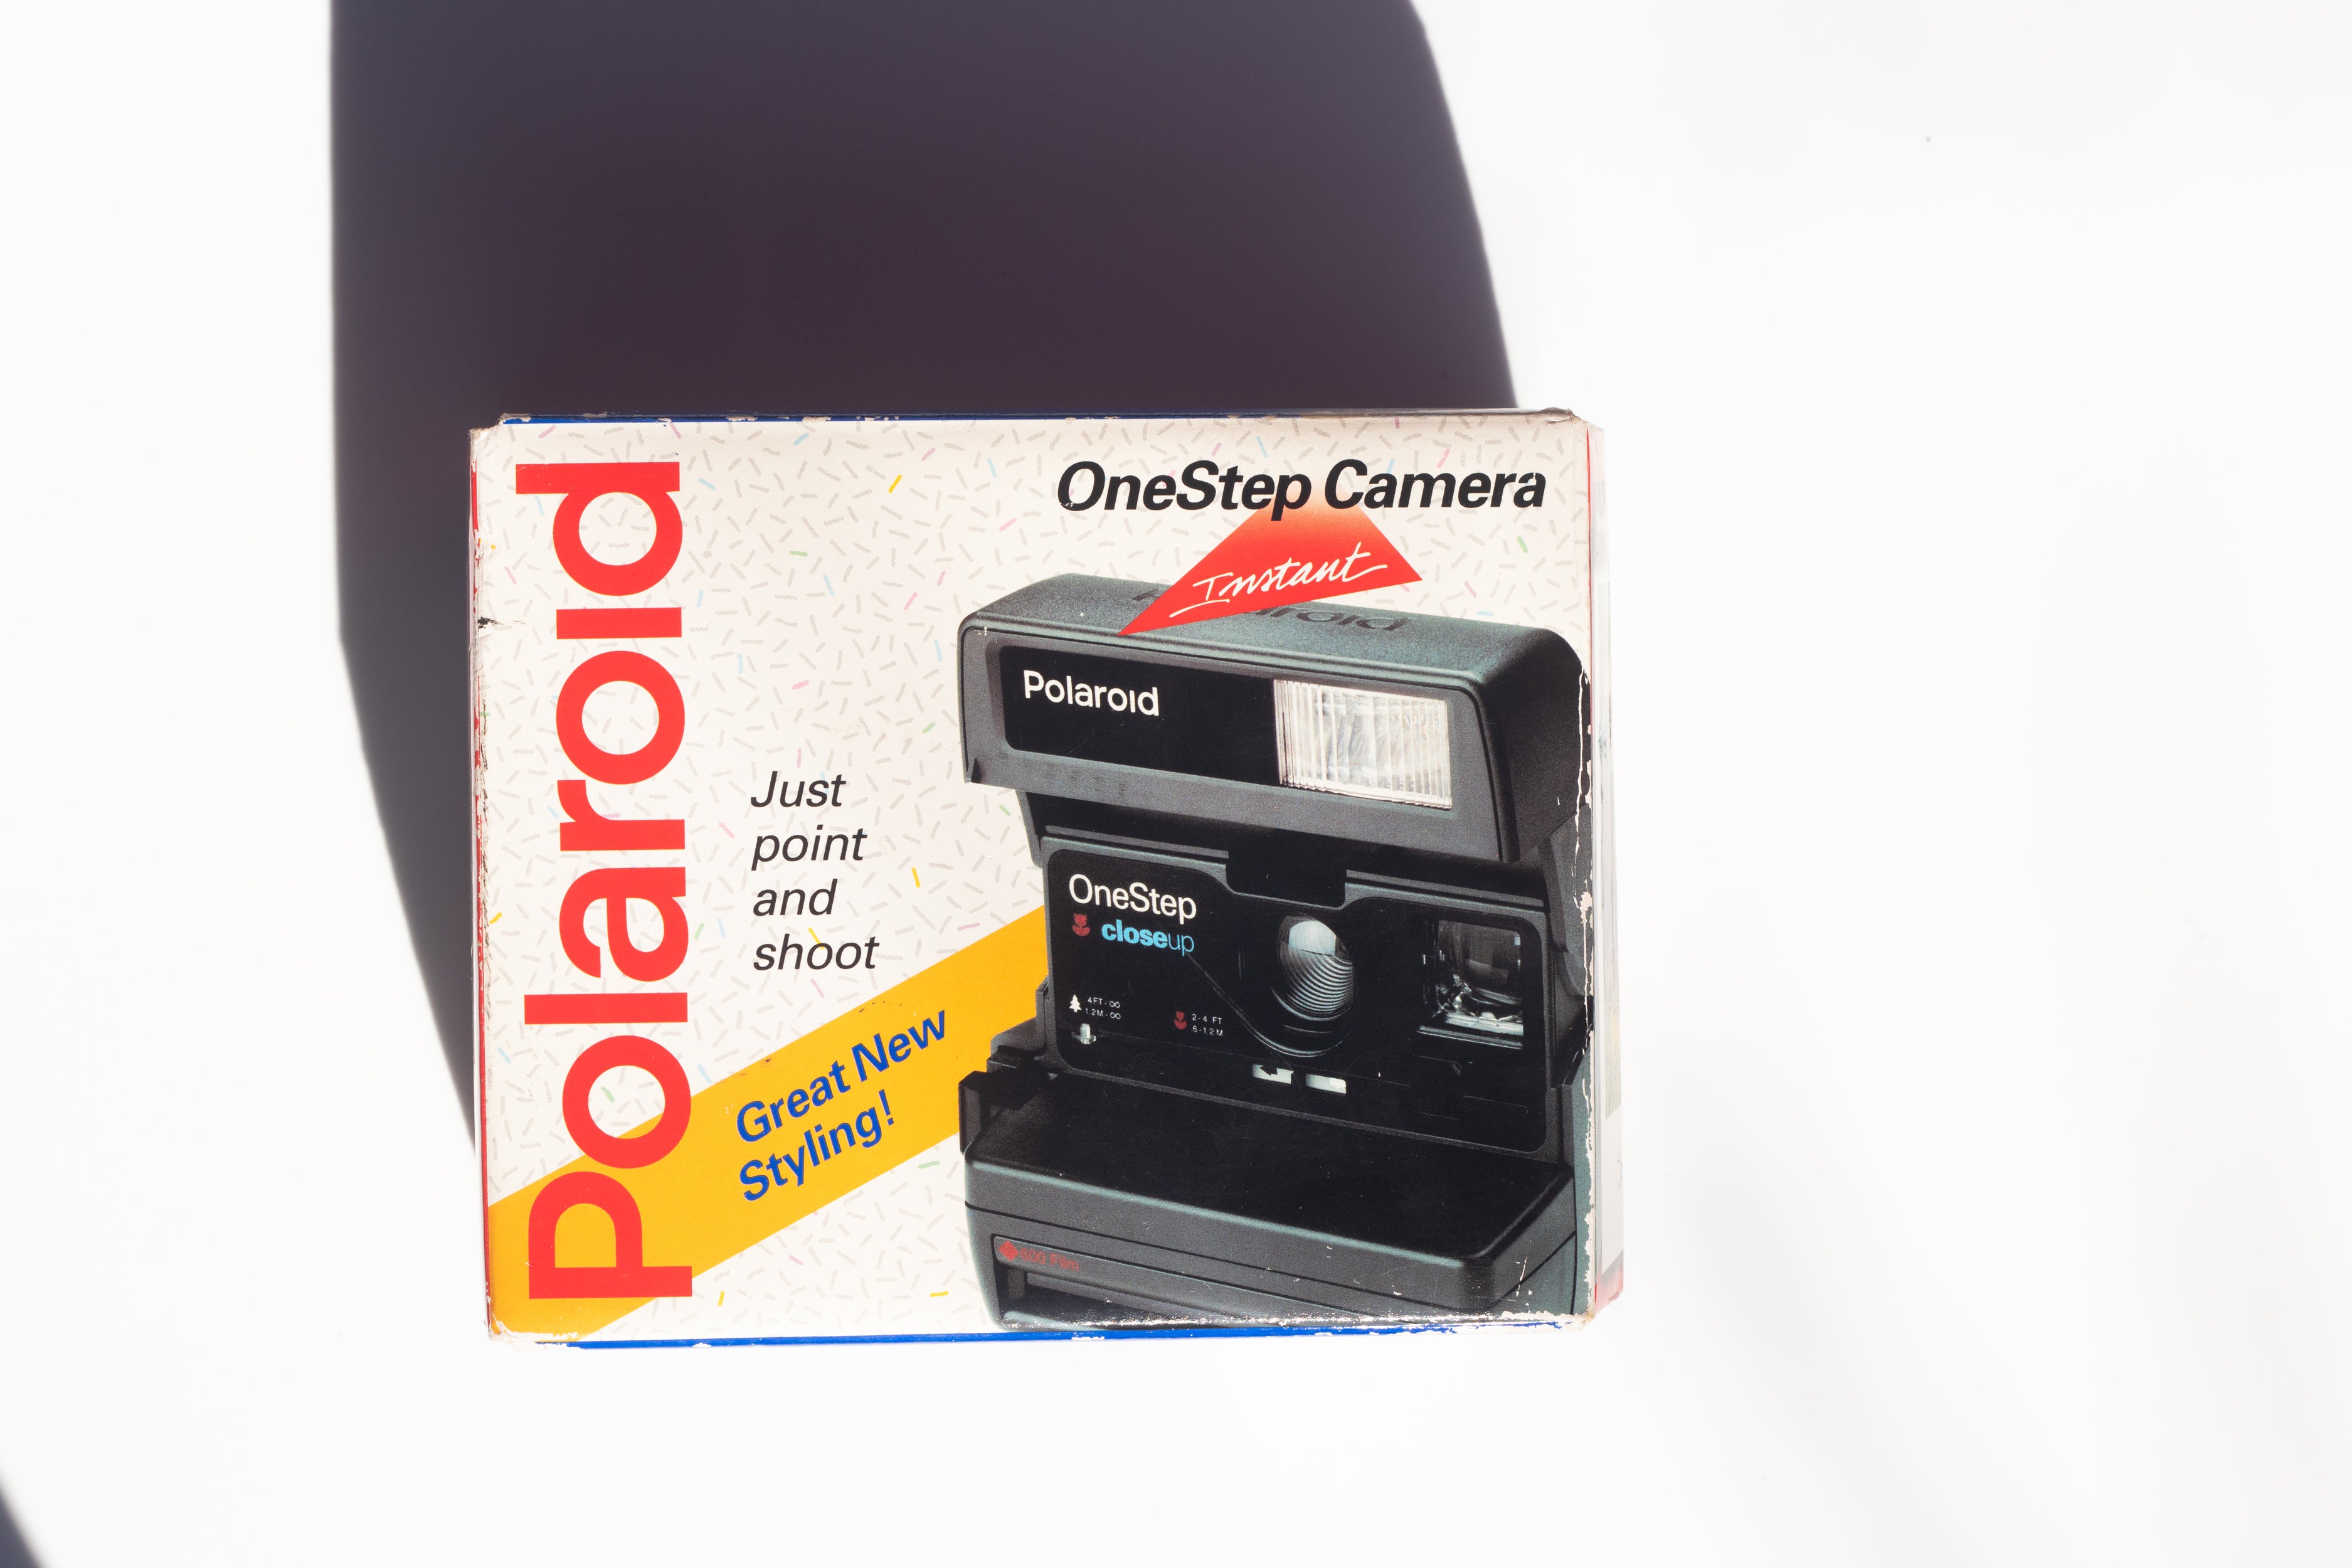 Looking for an Instant Camera? Just Get This